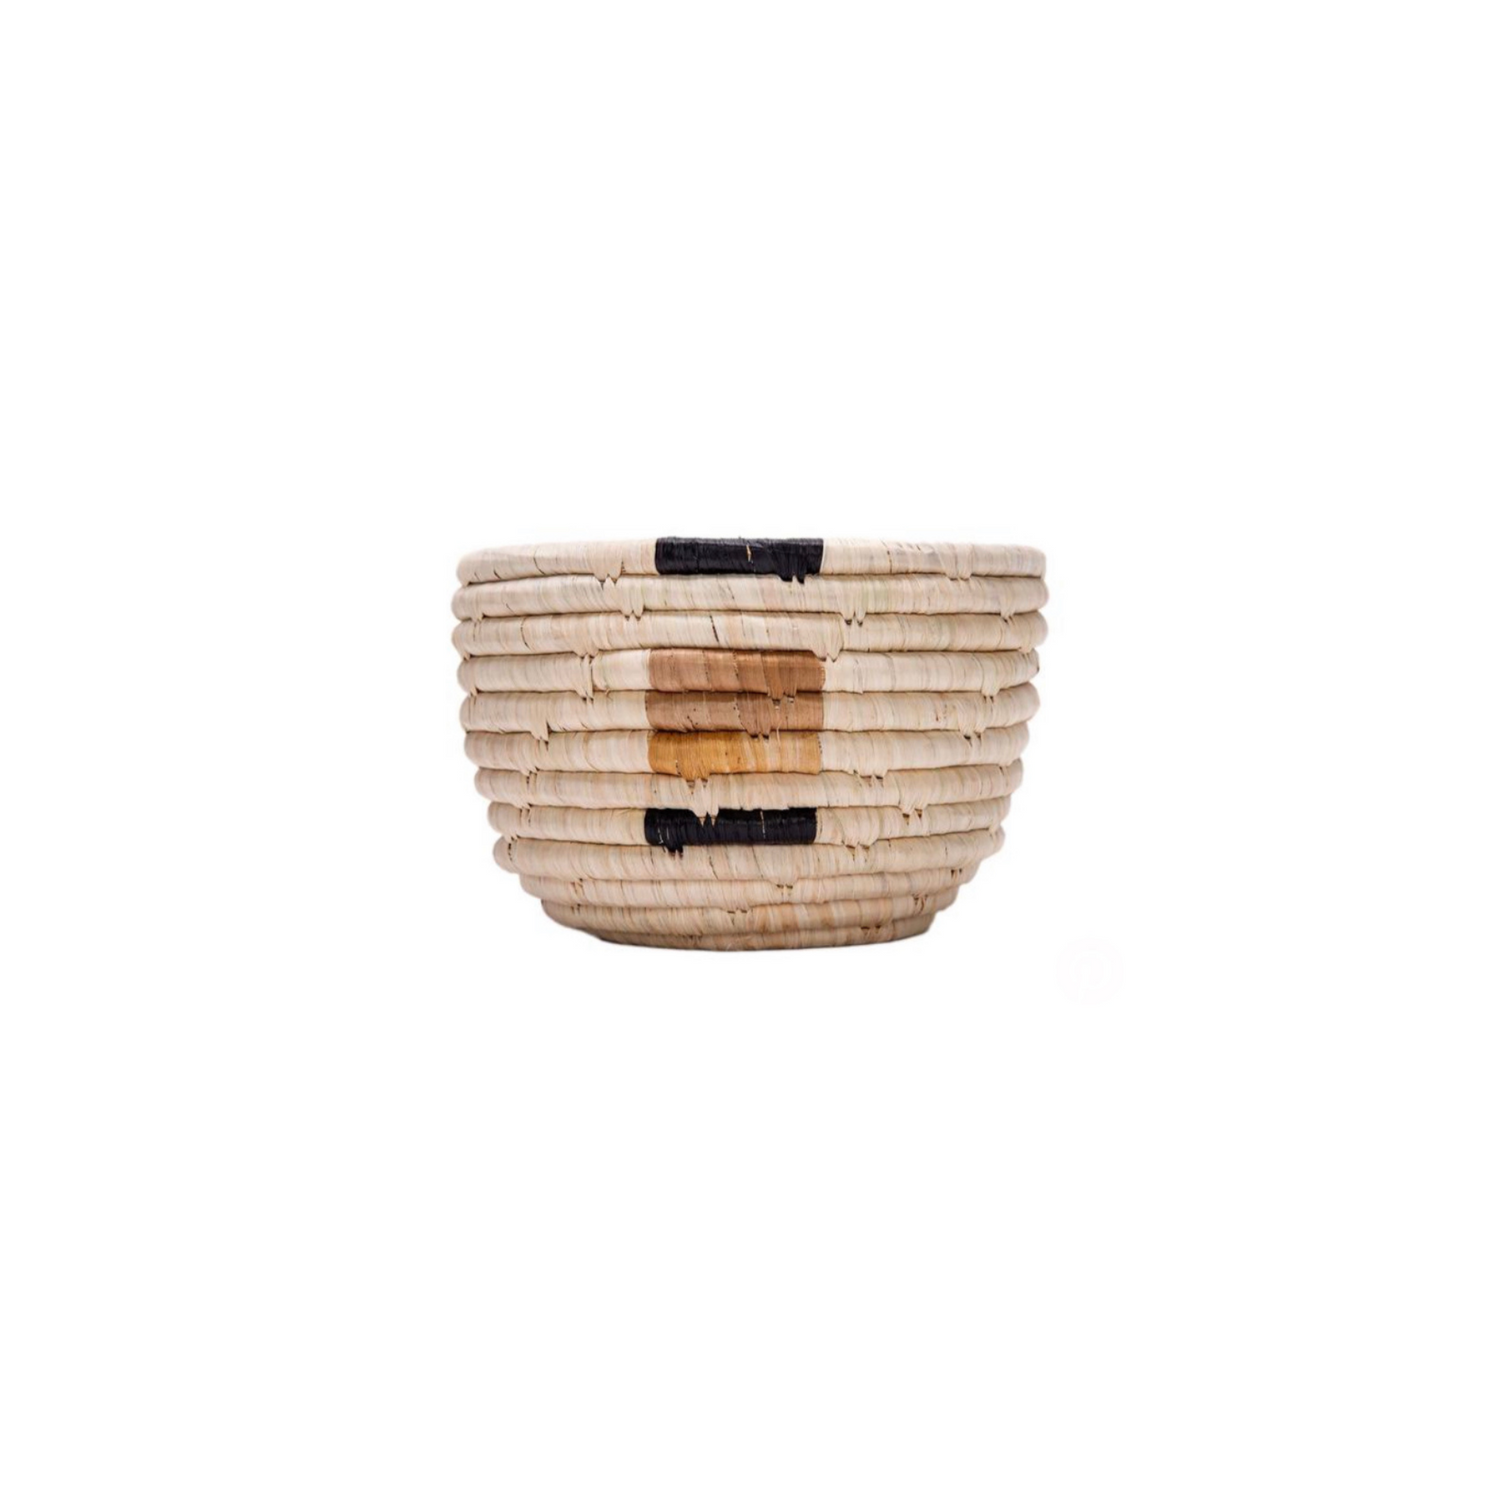 Woven beige raffia basket with a black stripe and a brown square in the center